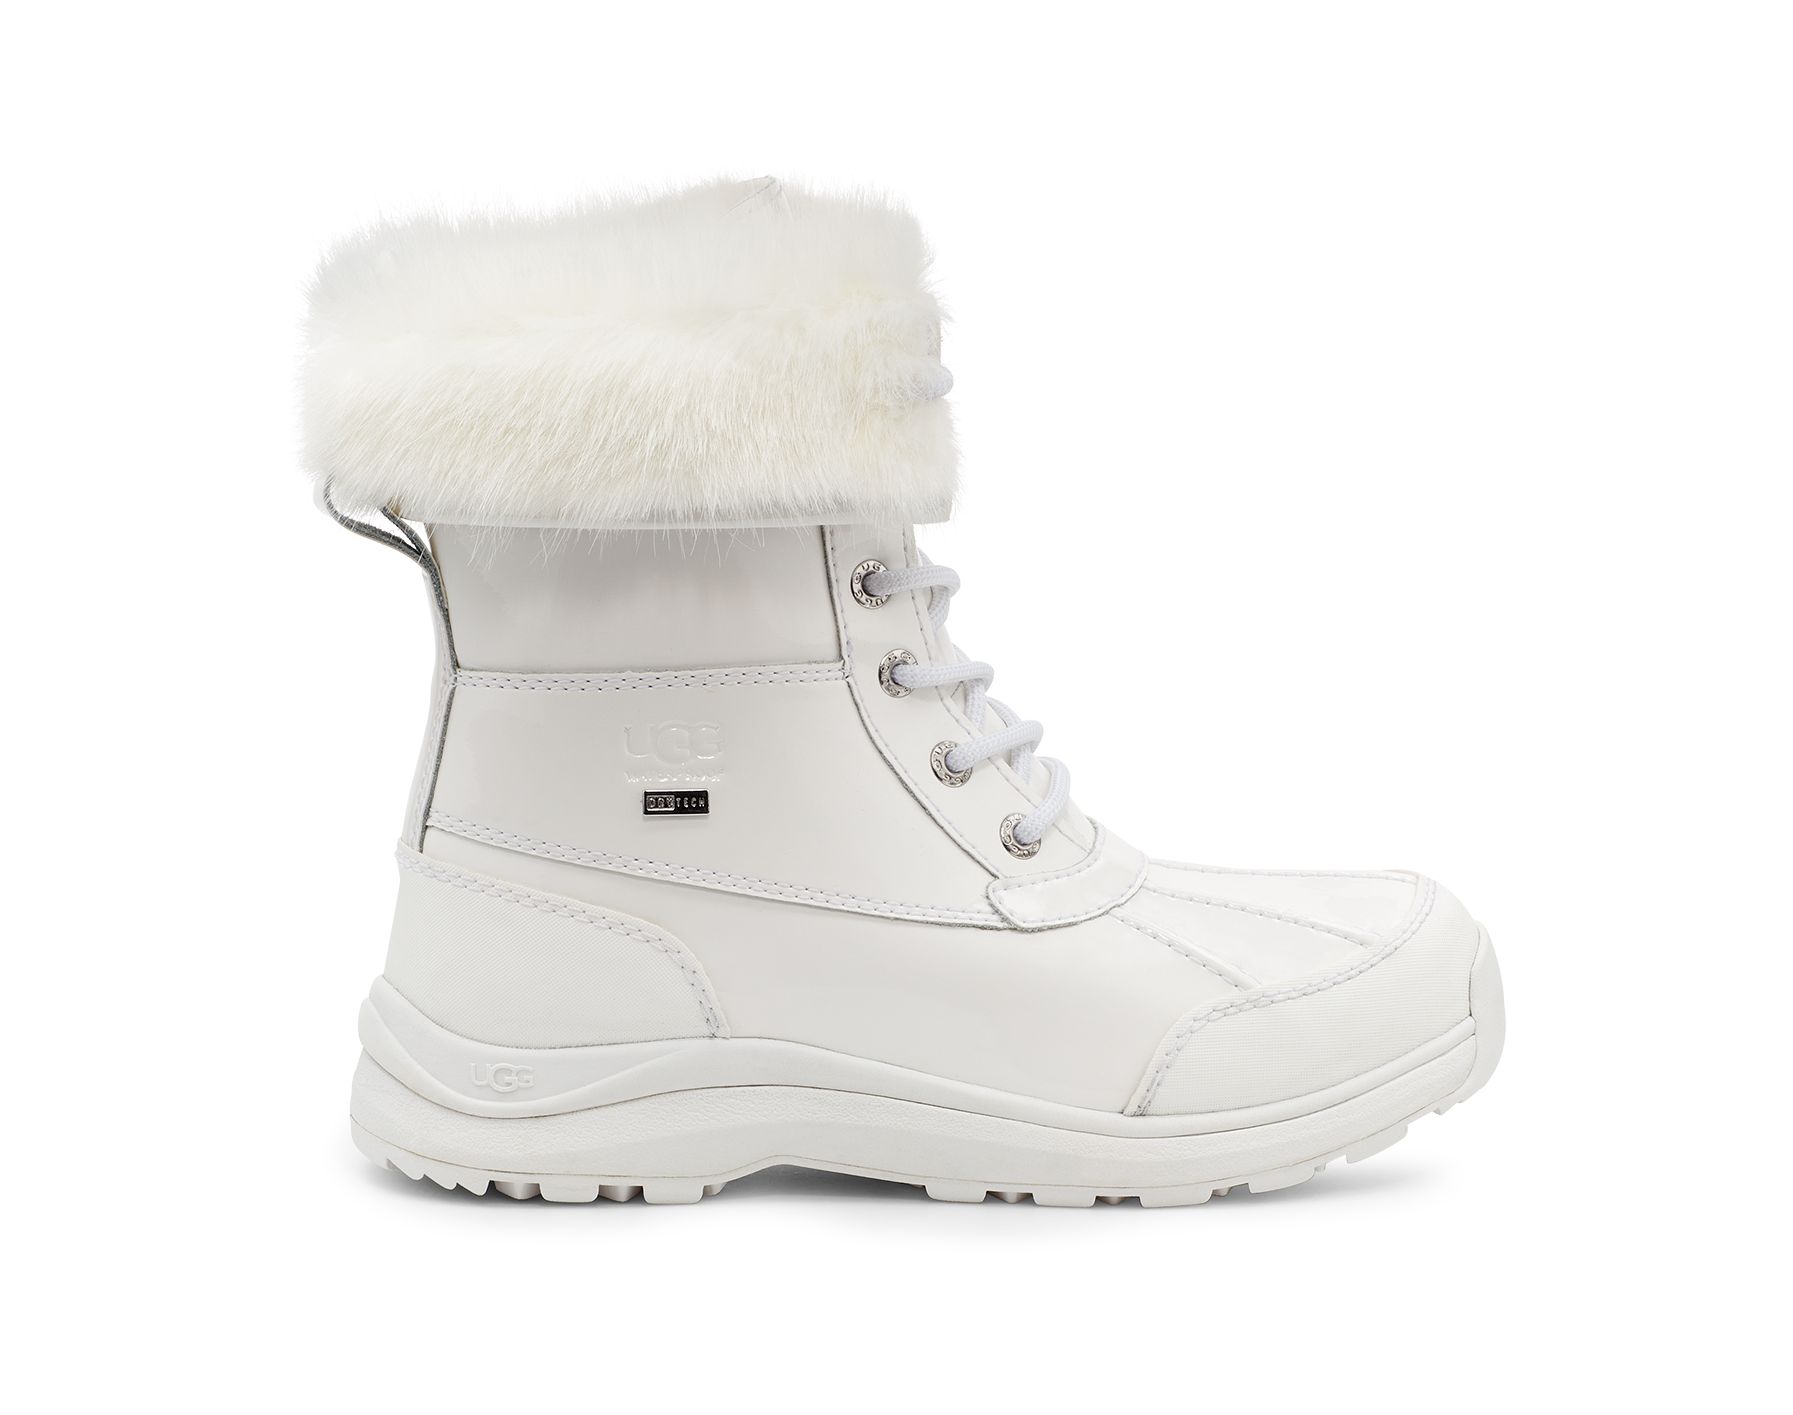 UGG Women's Adirondack Boot III Patent Leather Cold Weather Boots in White, Size 11 | UGG (US)